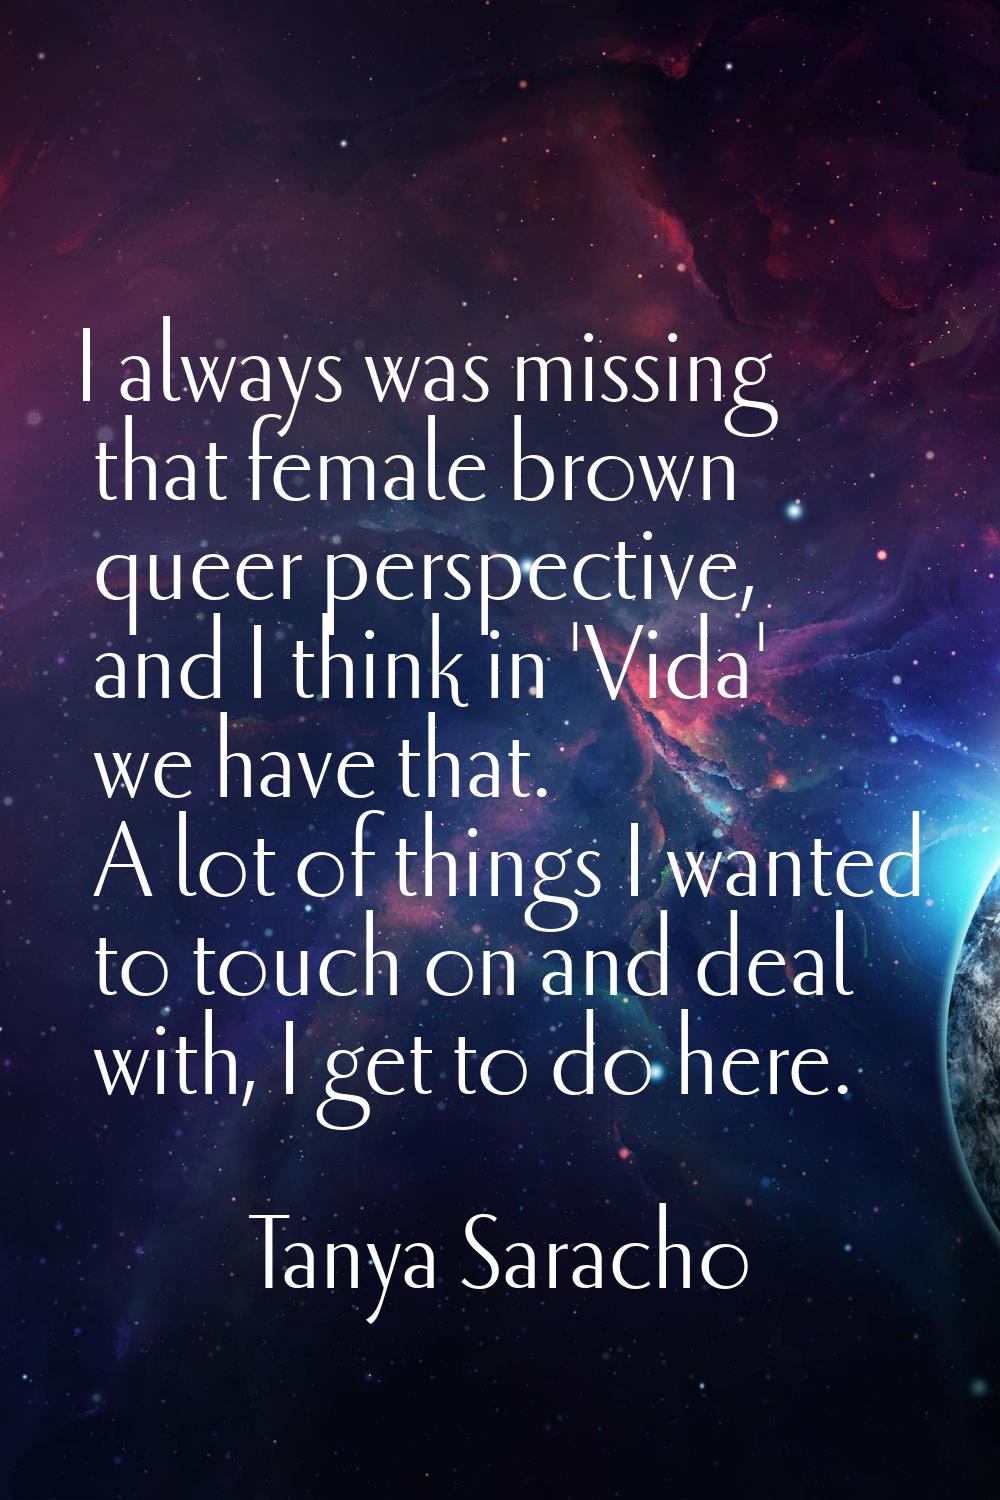 I always was missing that female brown queer perspective, and I think in 'Vida' we have that. A lot